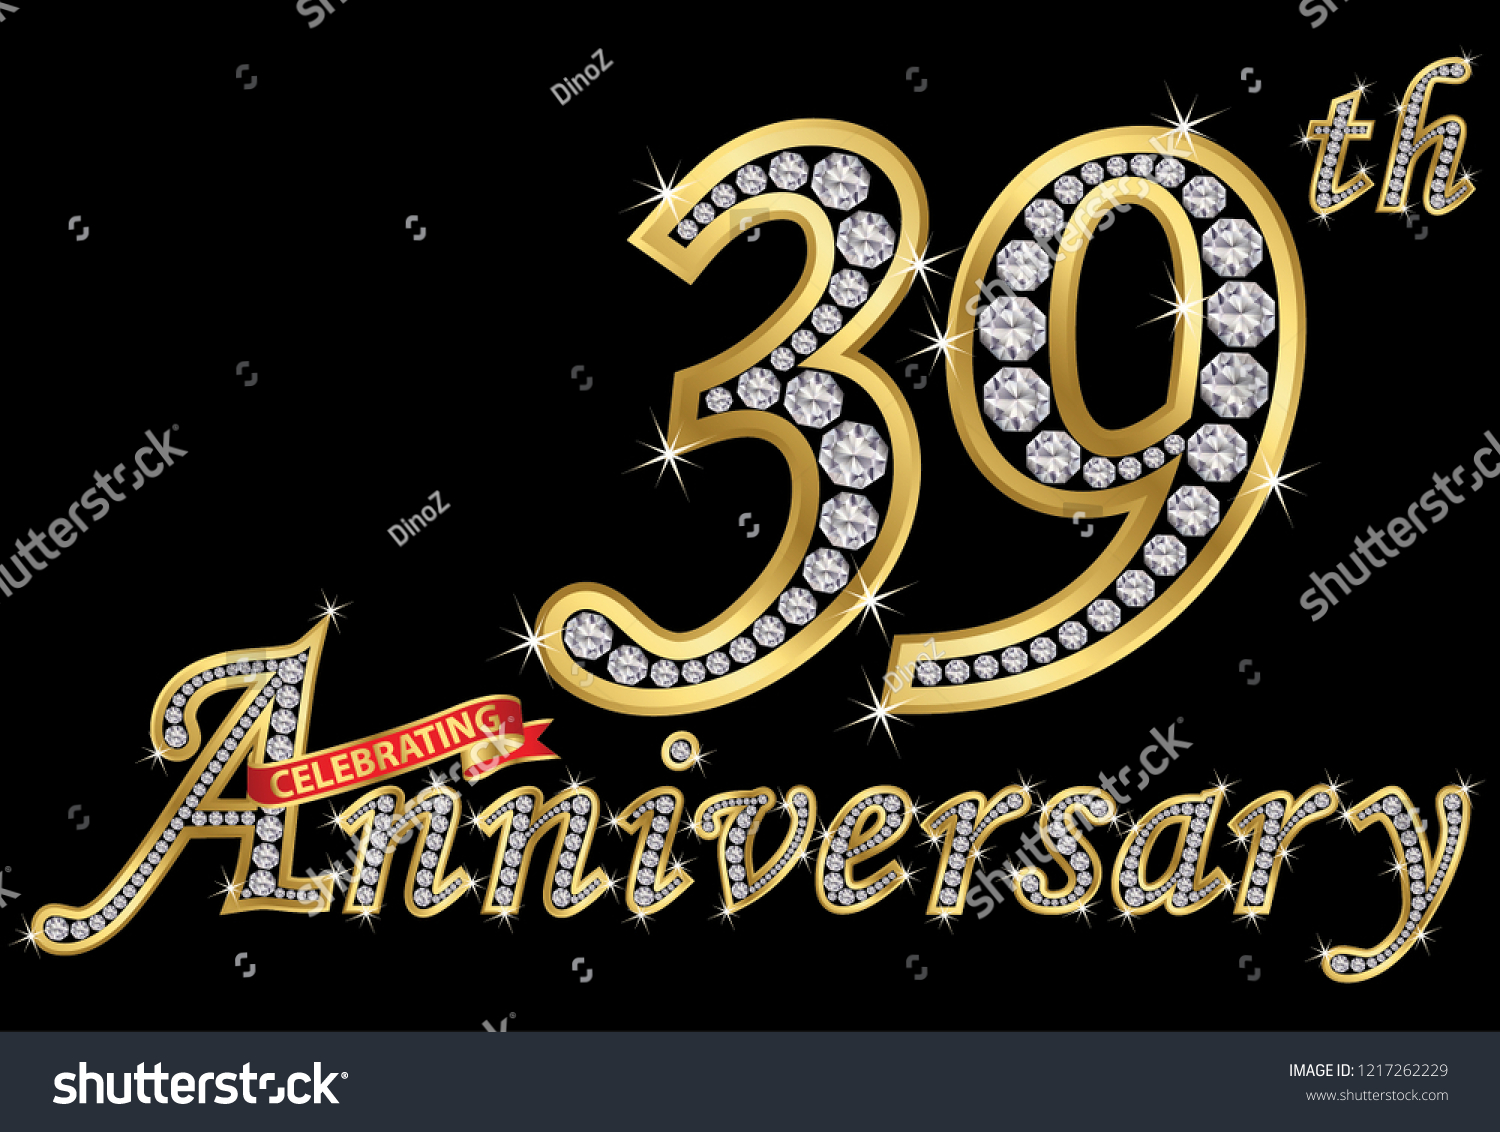 SVG of Celebrating  39th anniversary golden sign with diamonds, vector illustration svg